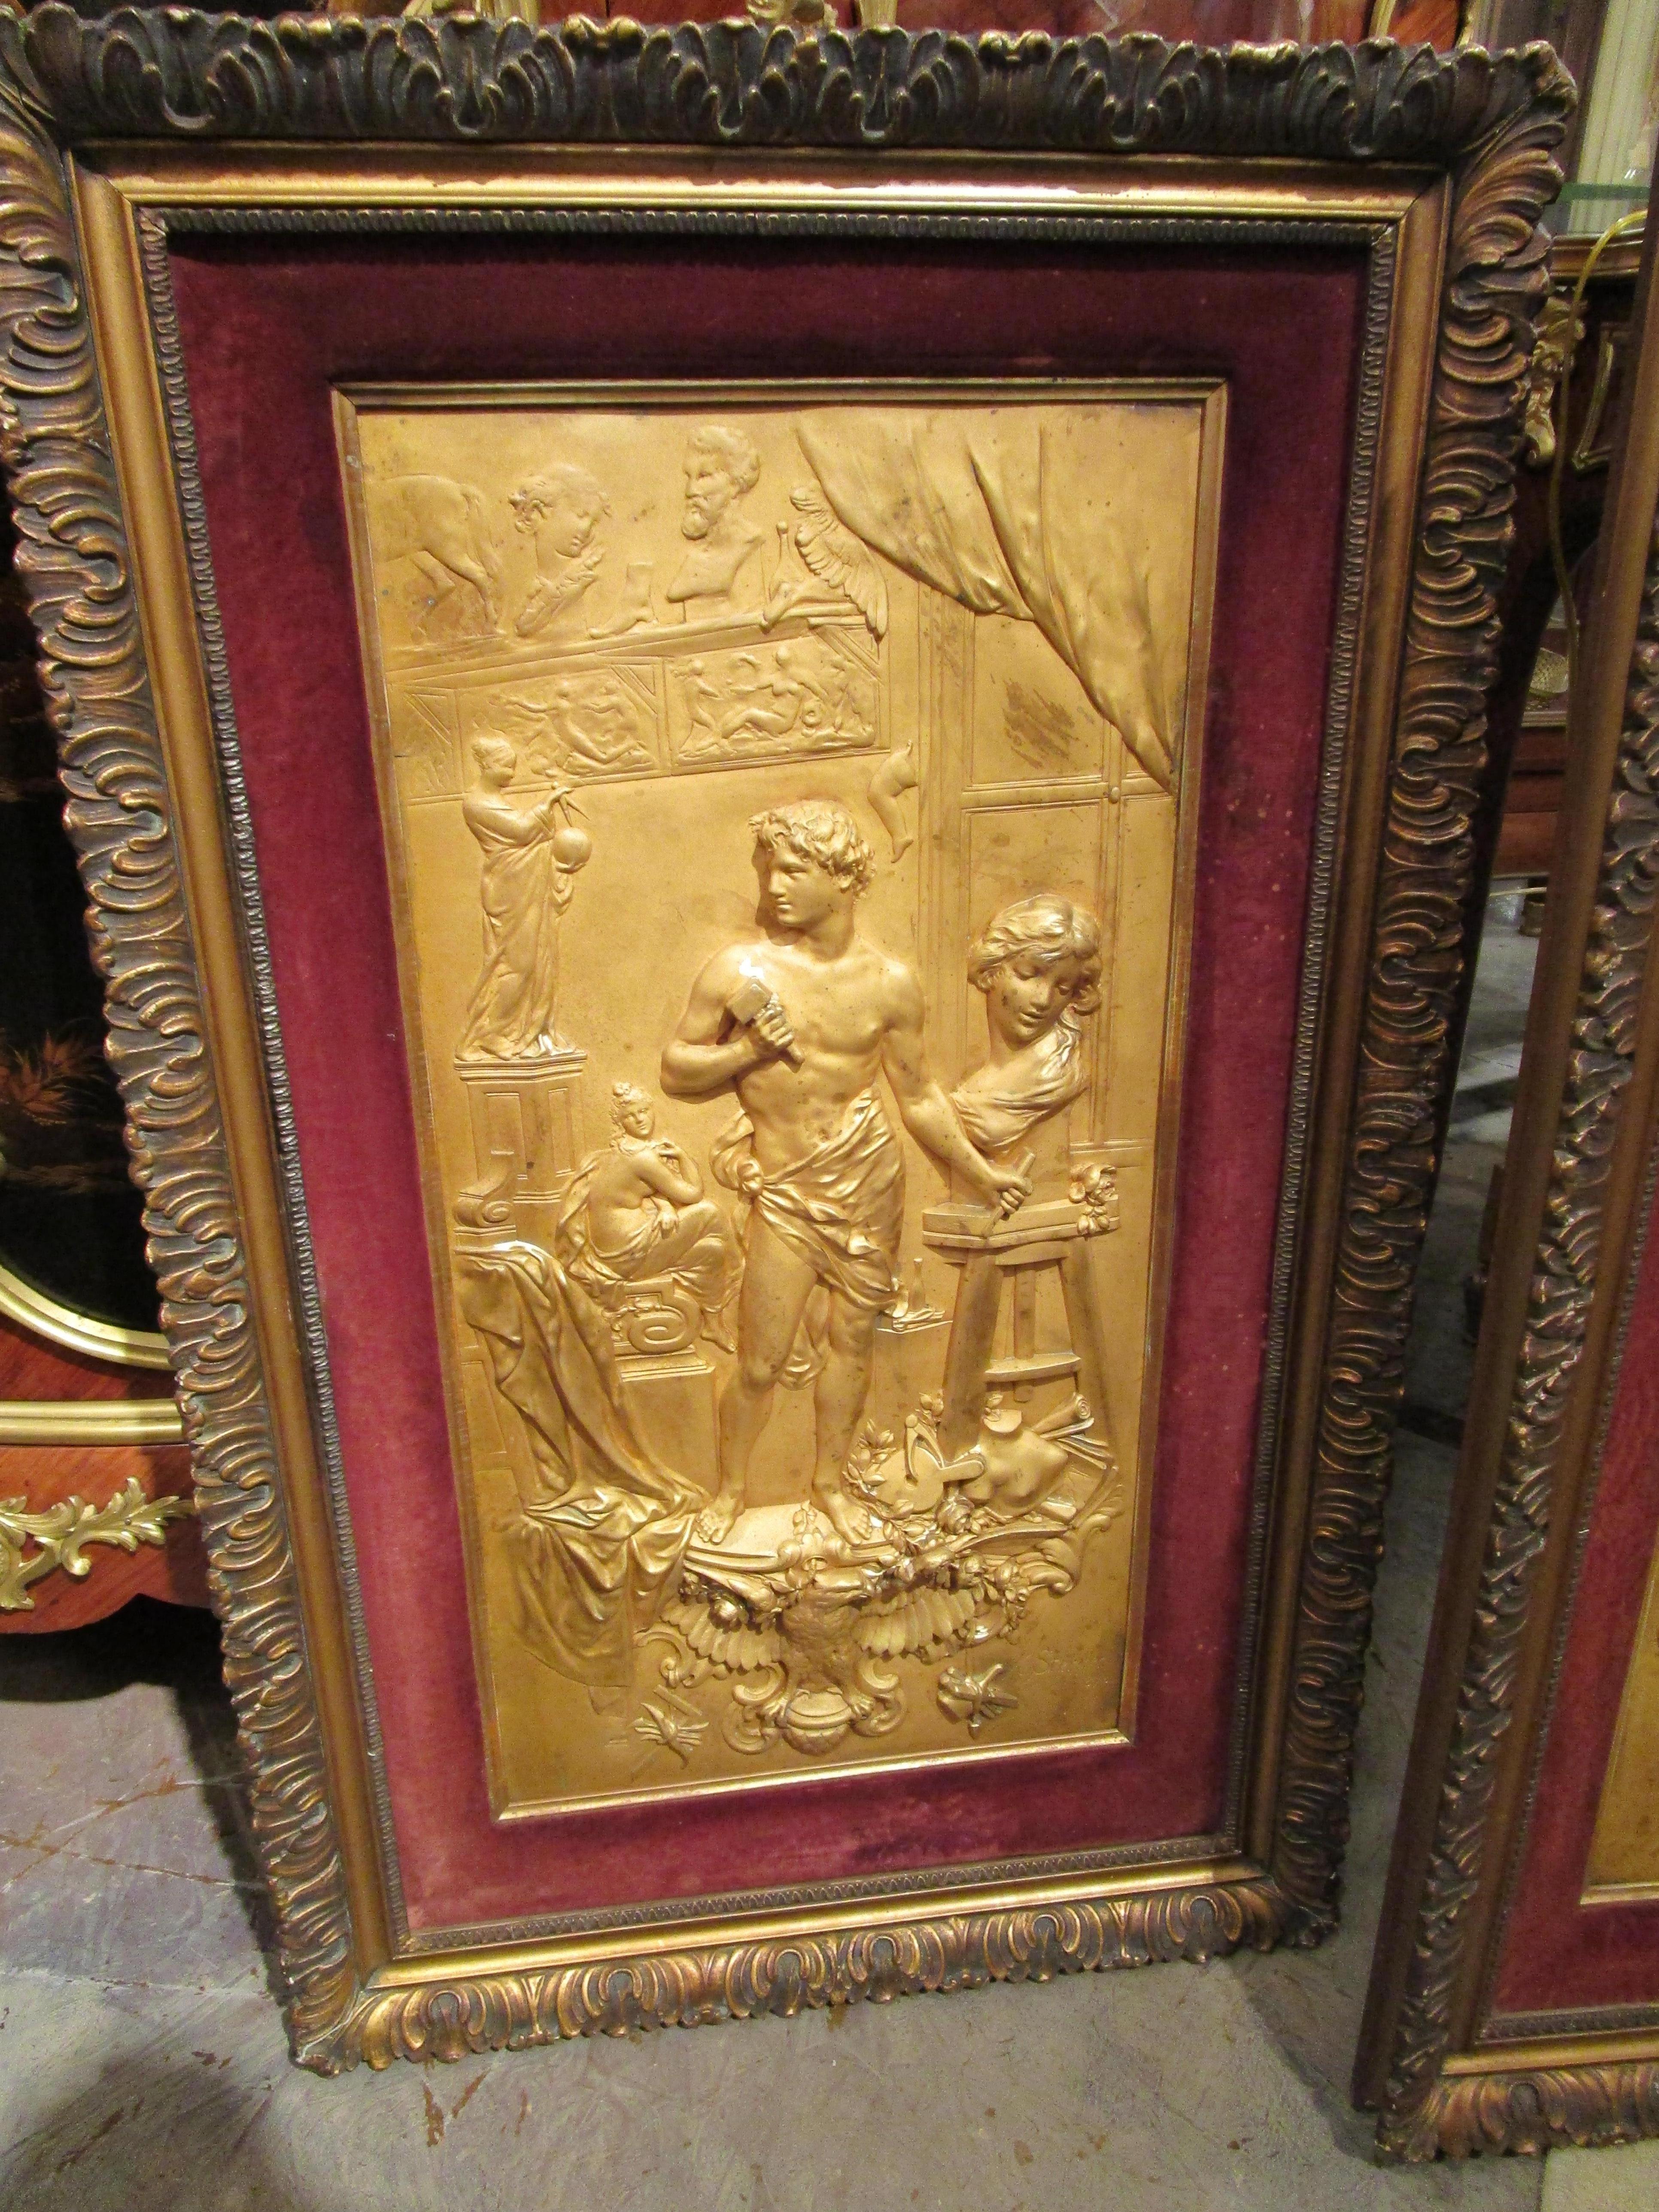 A fine pair of 19th century French gilt bronze relief plaques by Karl Sterrer. Finest gilt bronze relief of the Gods of the Arts. Apollo and Hebe his daughter.